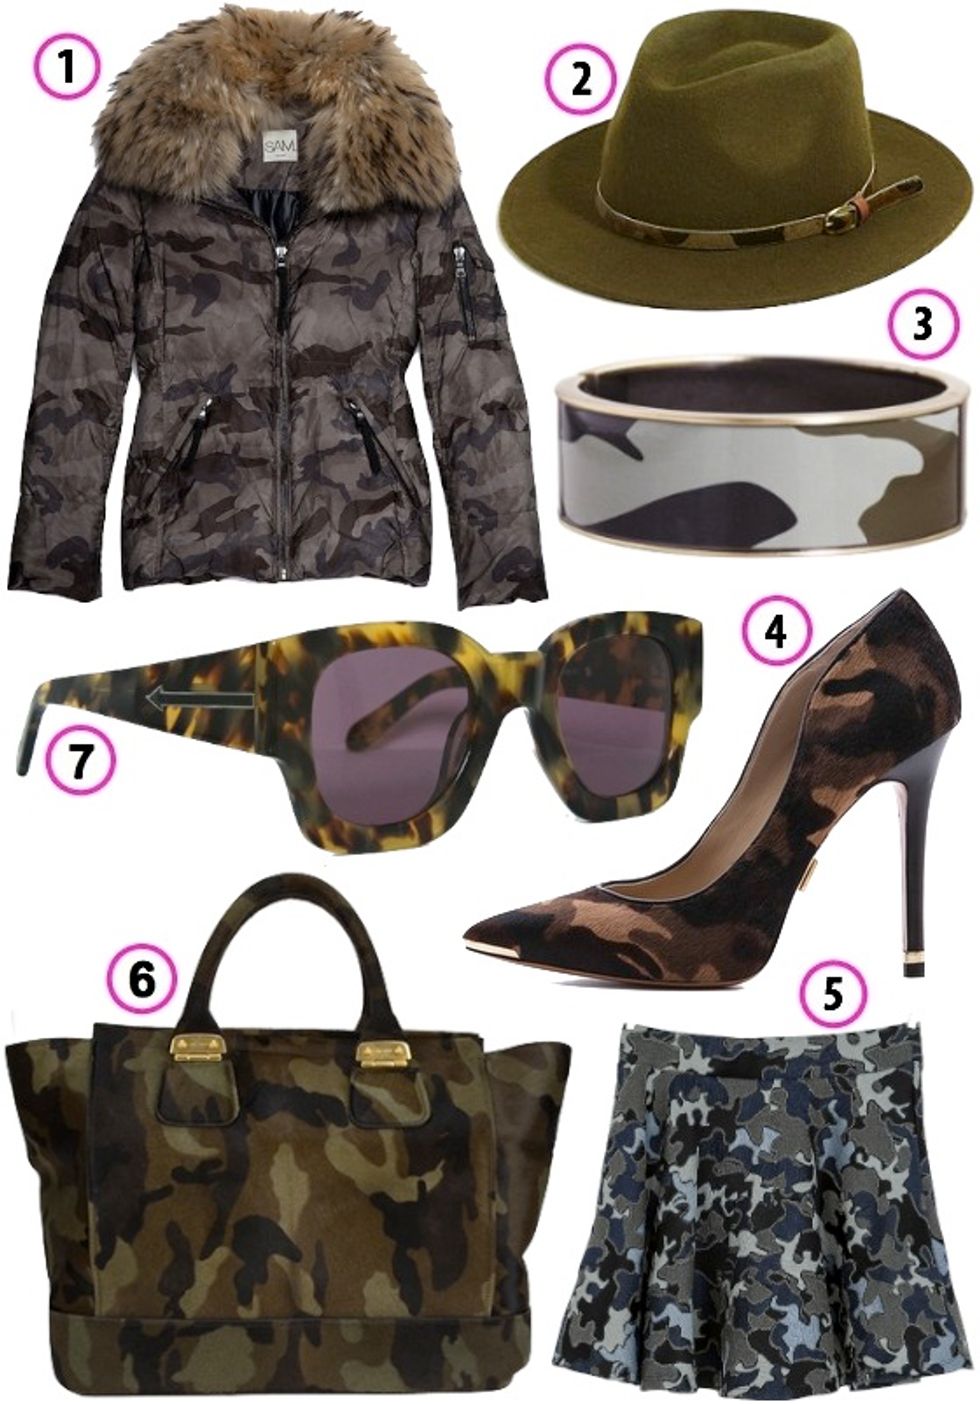 Look of the Week: Camo Chic